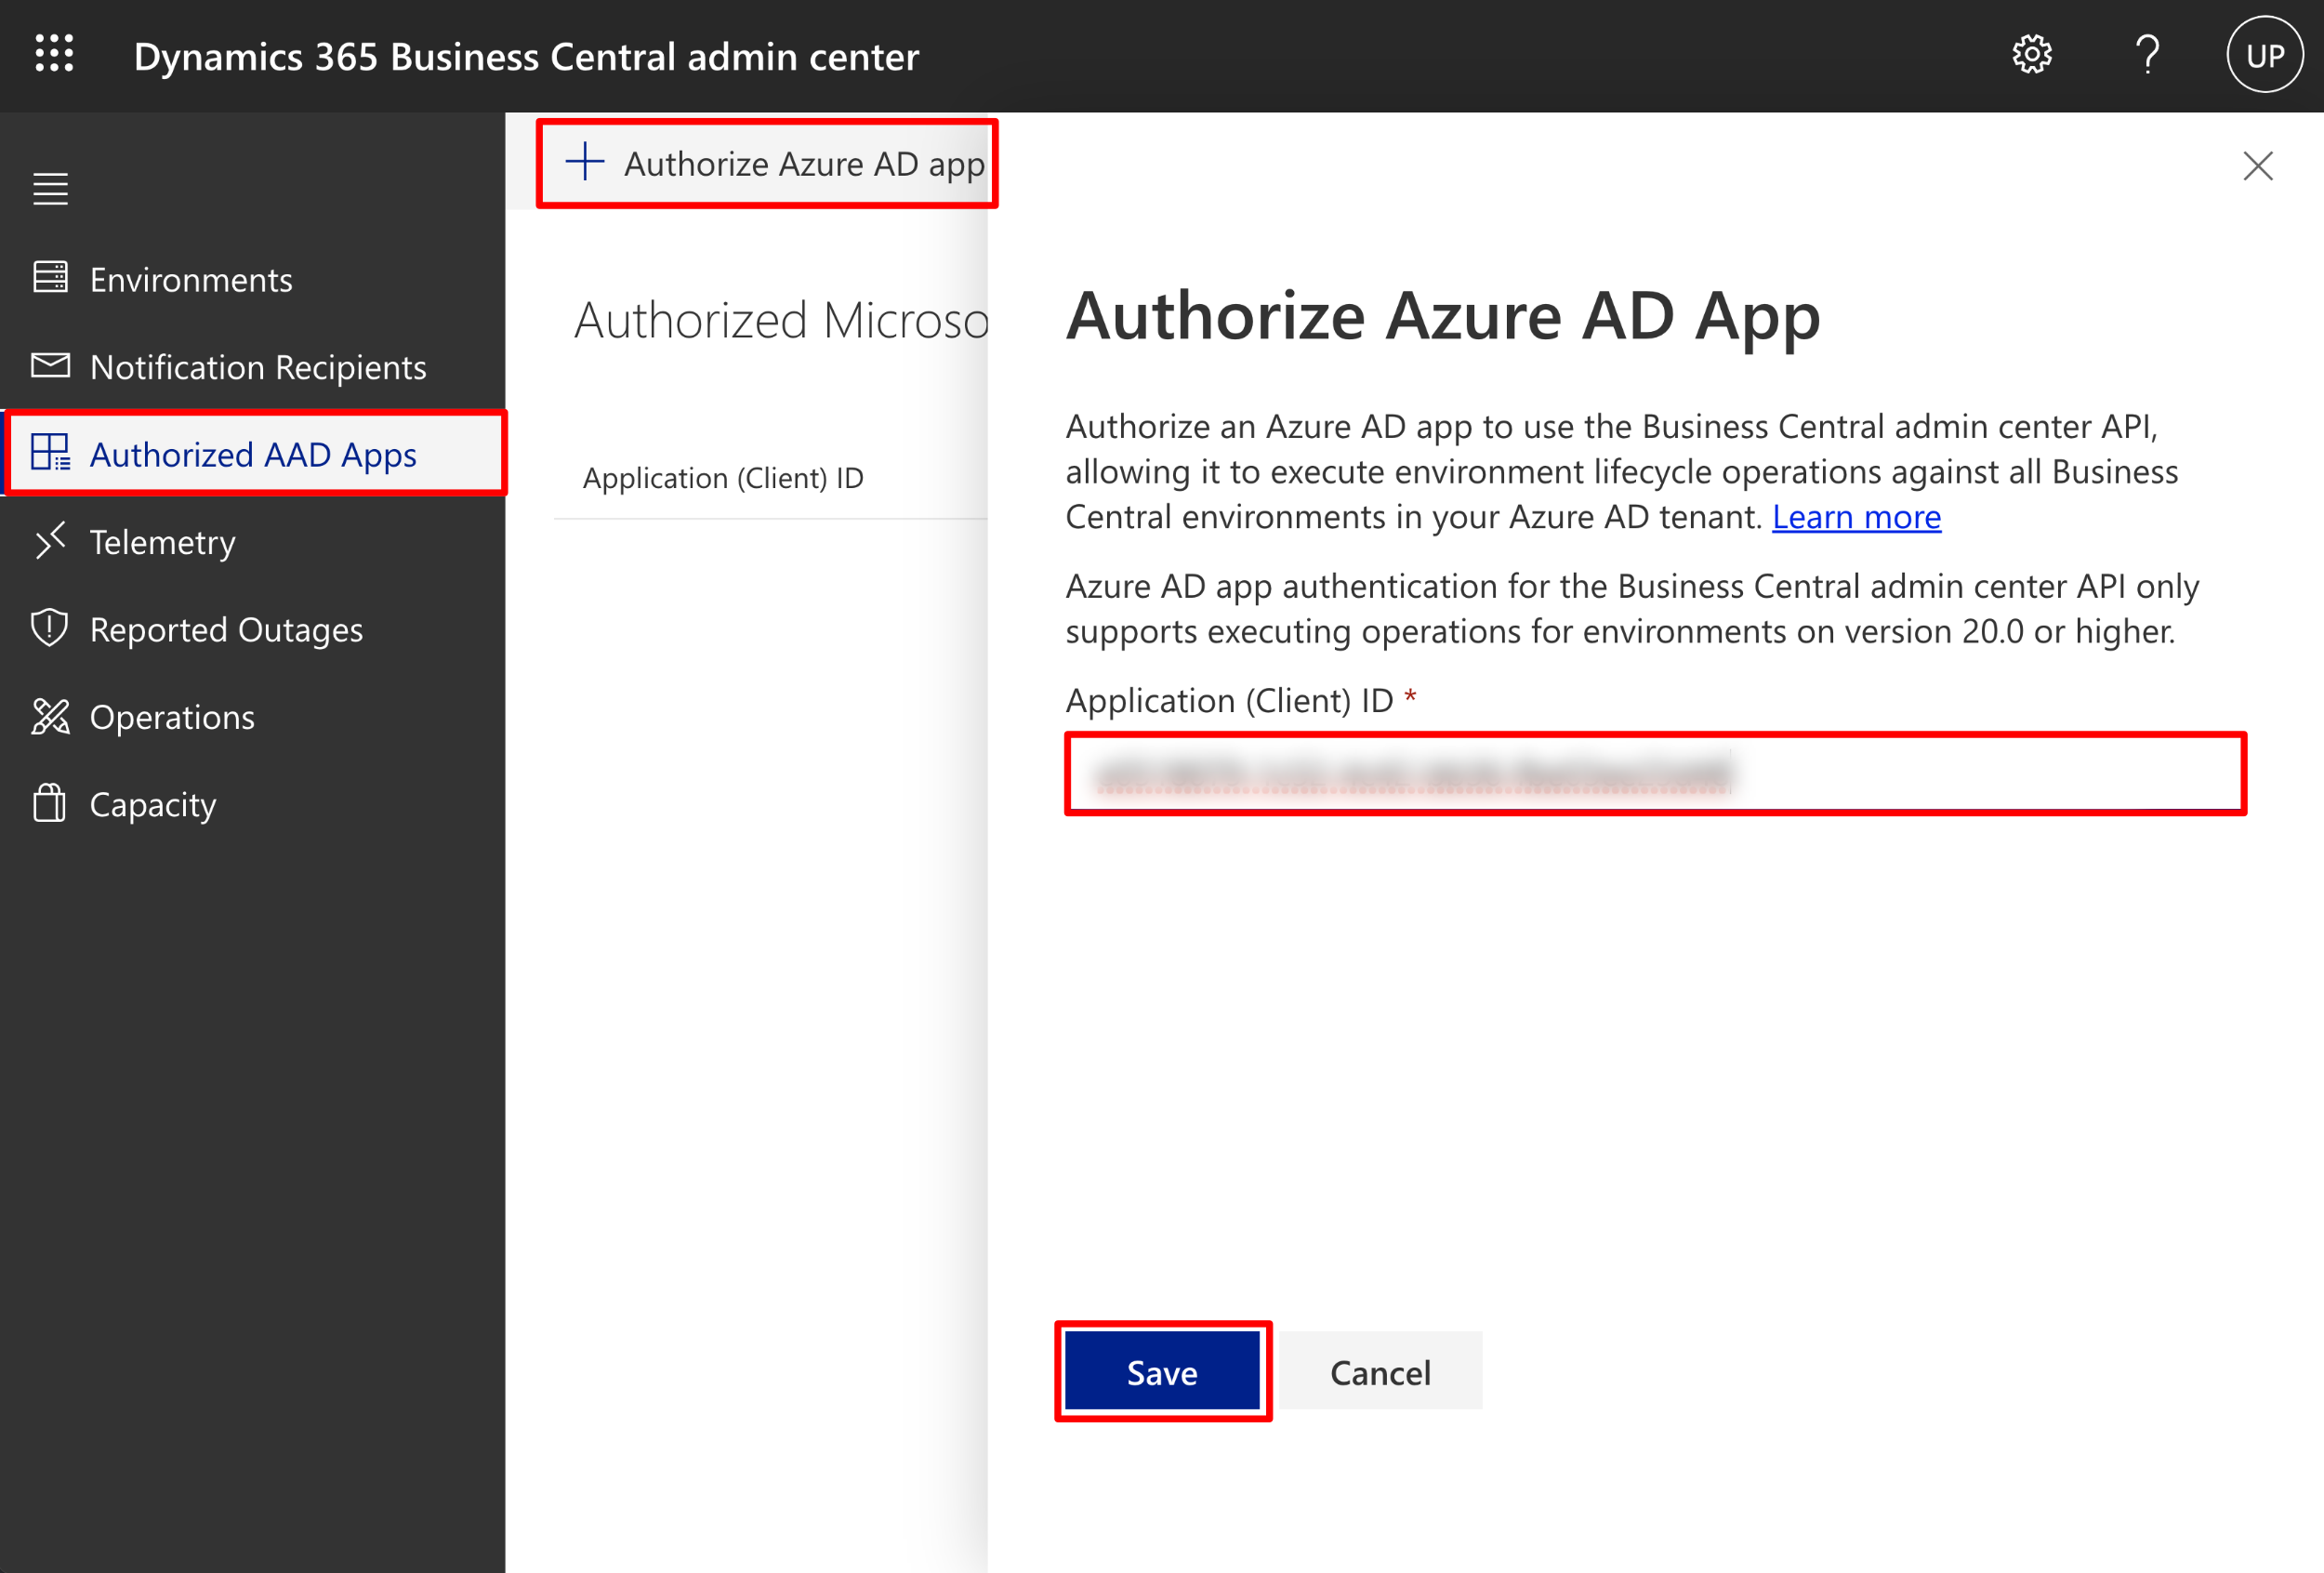 Onboarding: Microsoft Dynamics Business Central - Authorize Azure Application